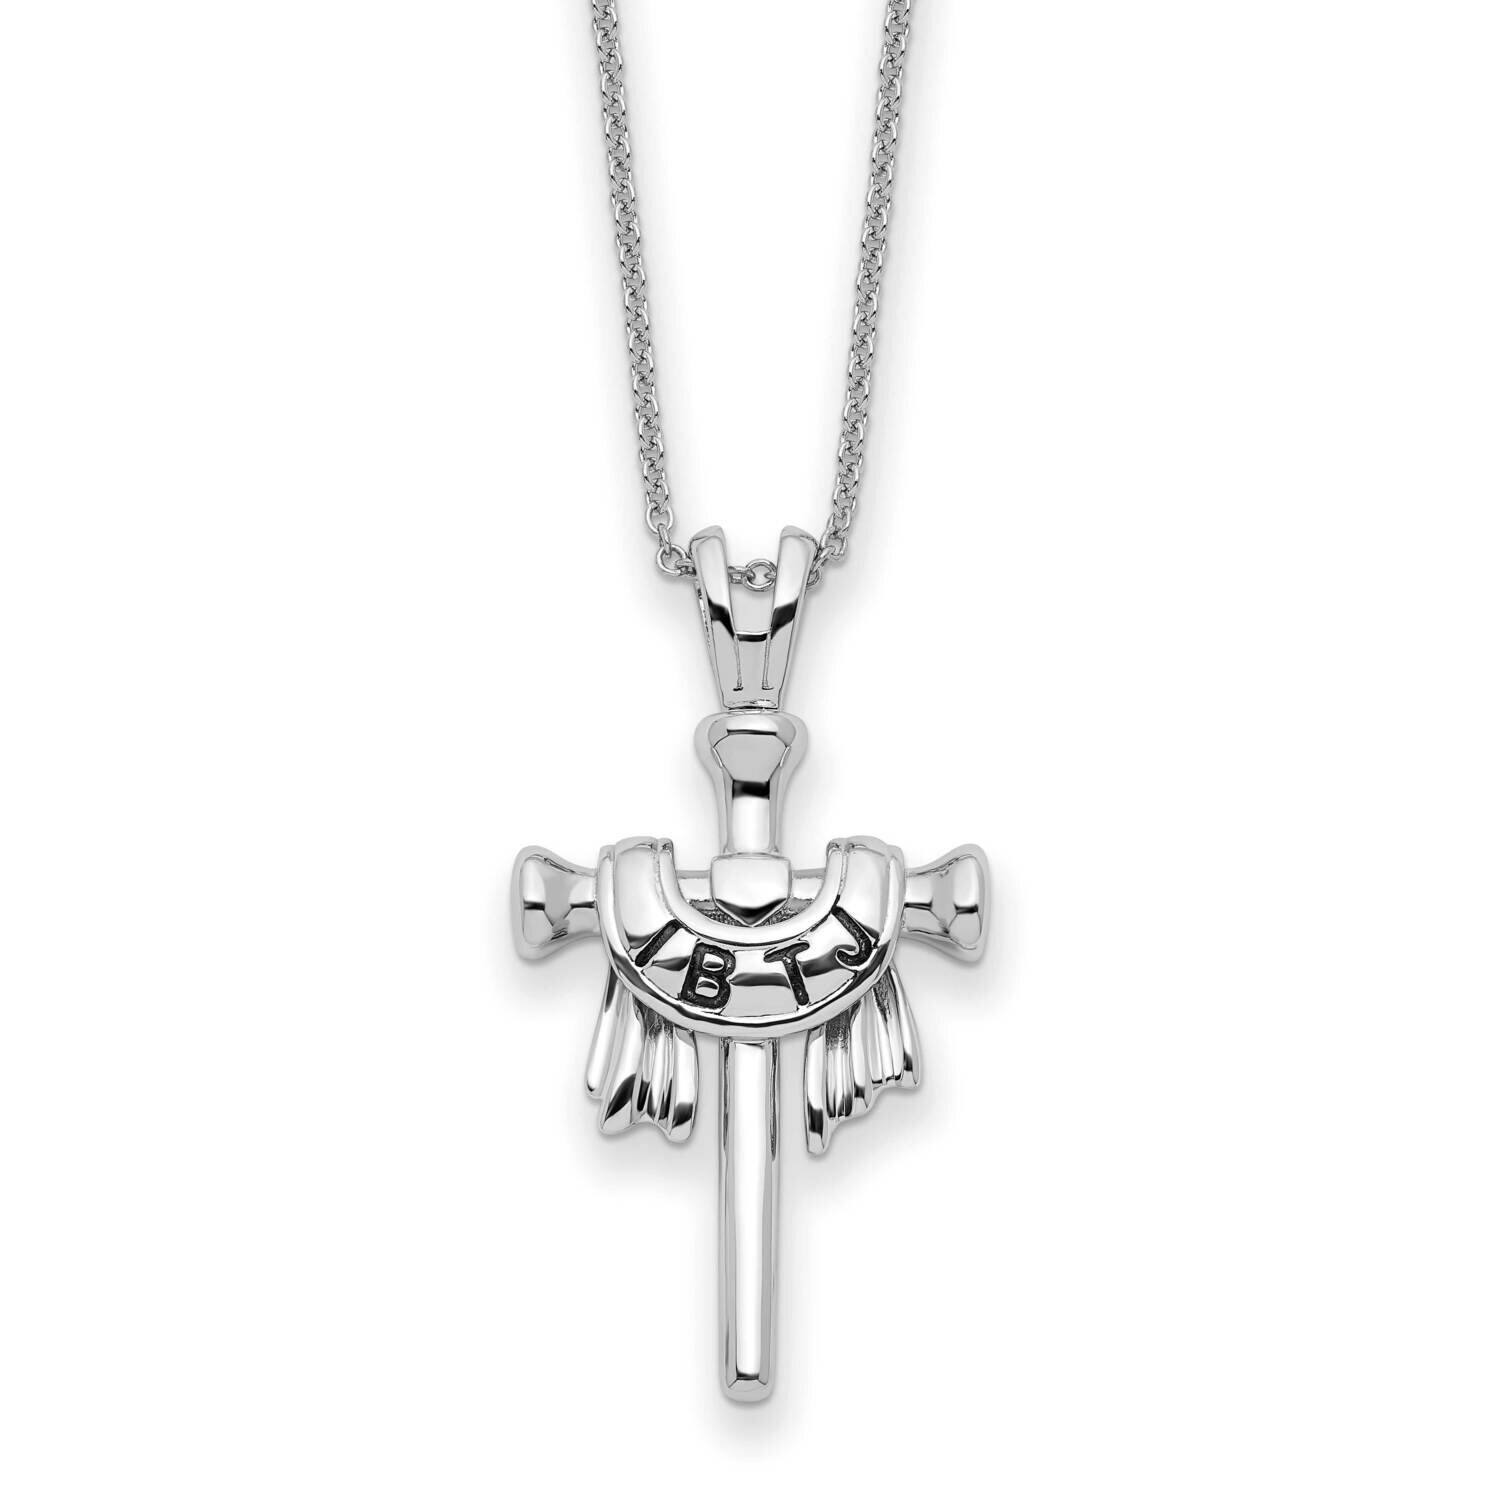 Antiqued Ibtj Cross 22 Inch Necklace Sterling Silver QSX724